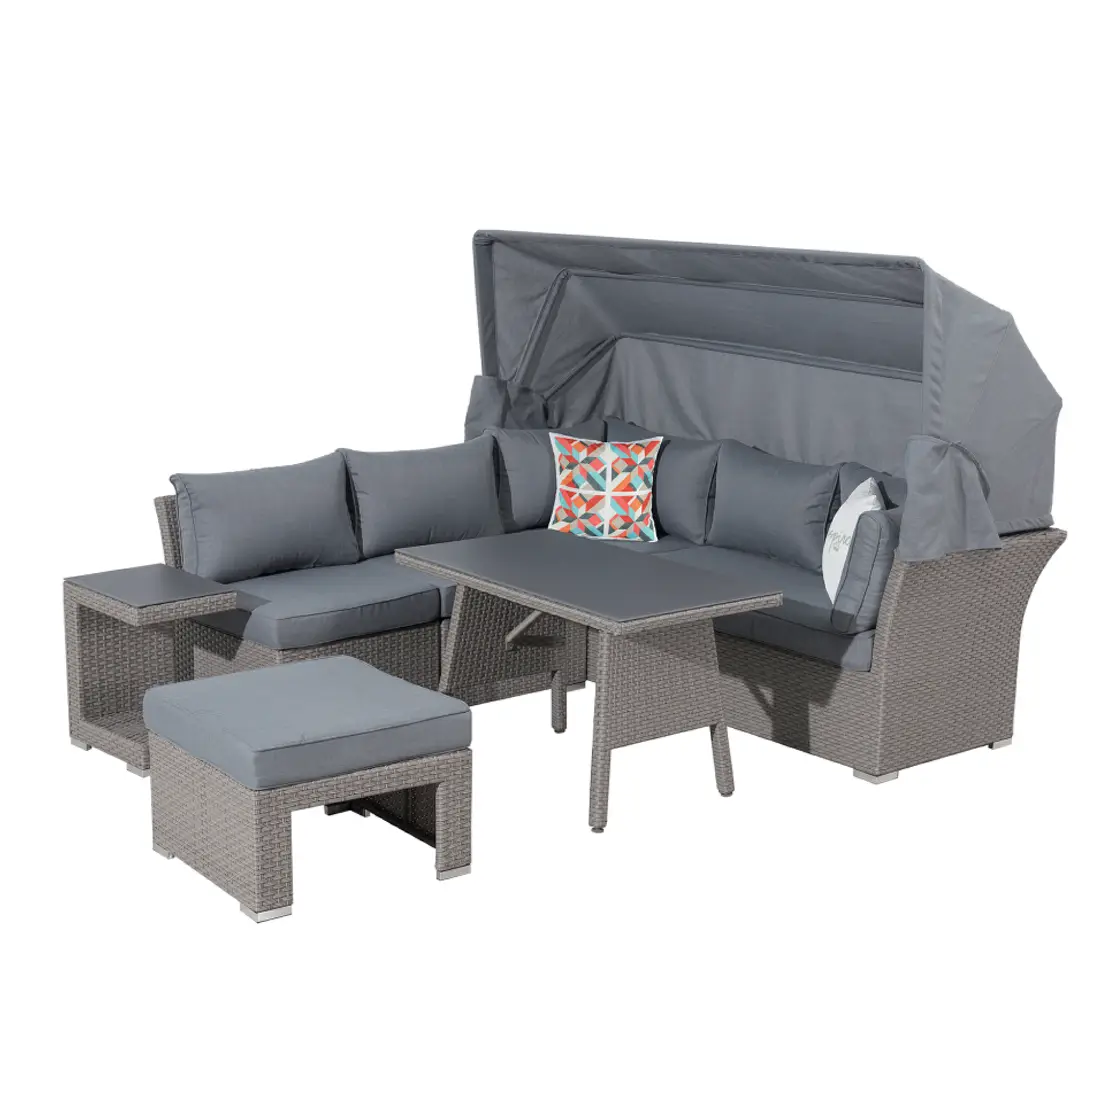 Relax -Daybed mit Dining Dach Lounge Set